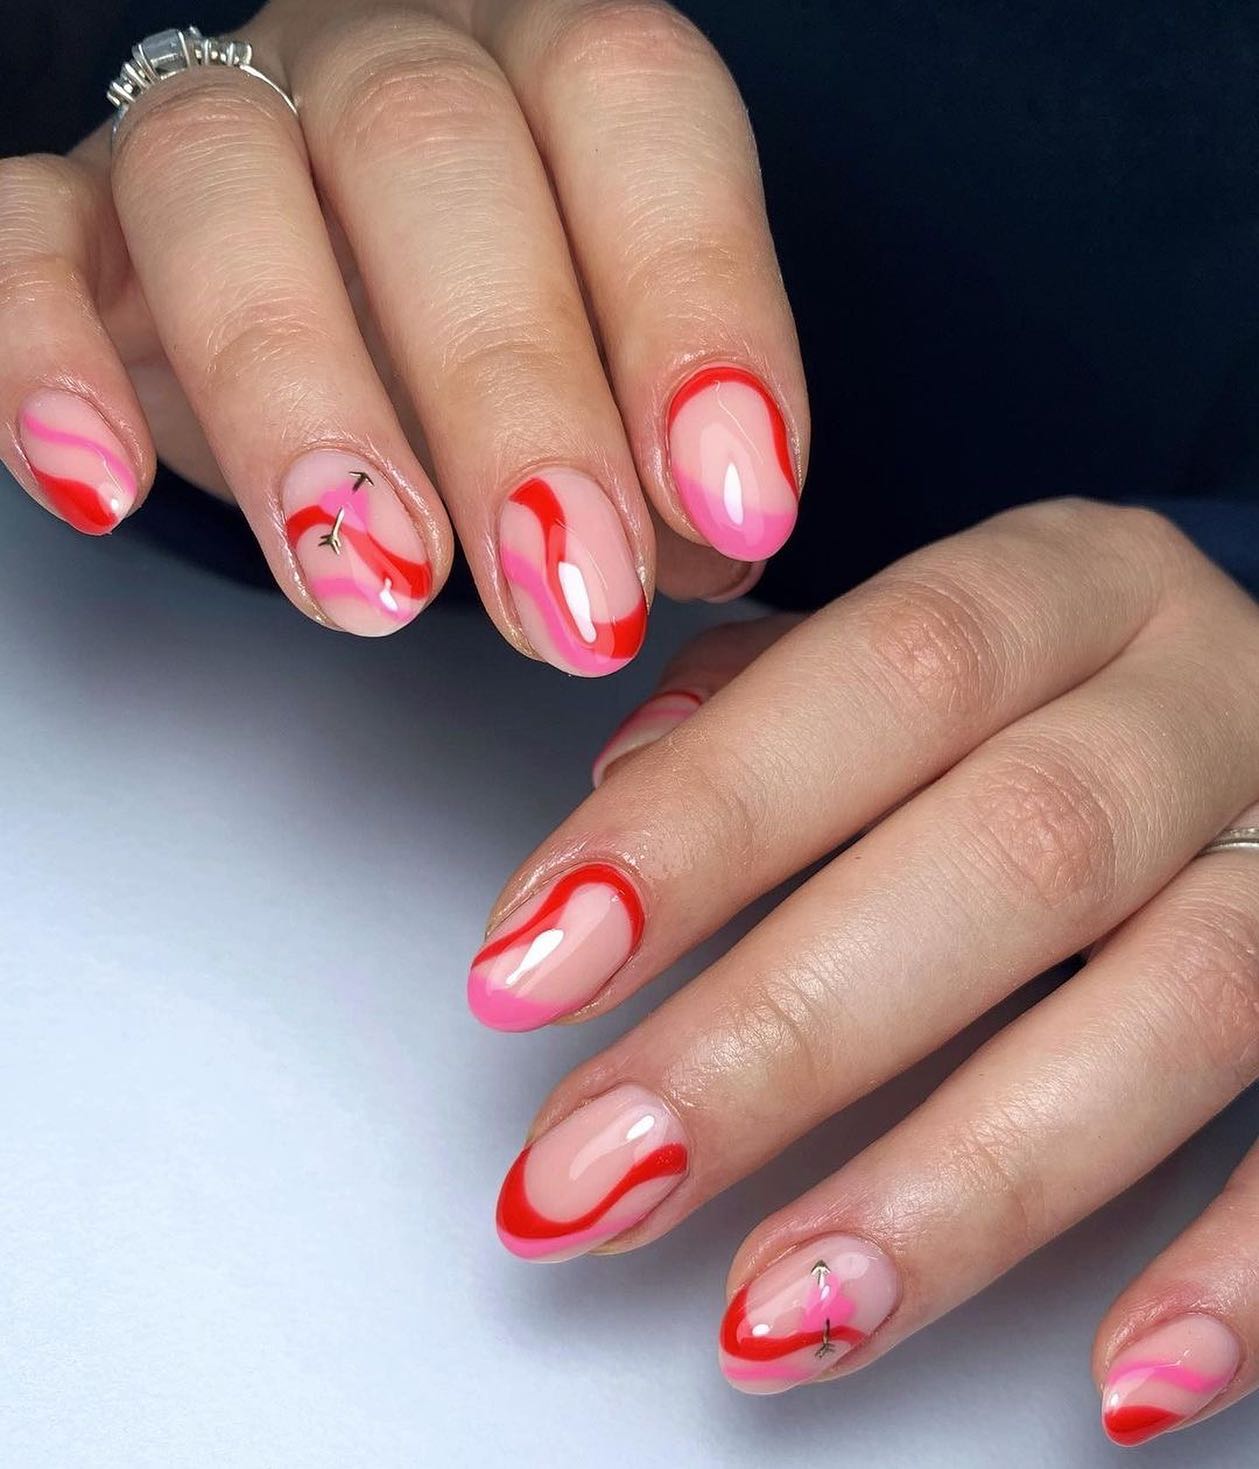 The red and pink swirl nail art is so fabulous and fun! You can create this look by using a small brush to draw on swirls. The trick is to make sure that you're using gel polish so that your design won't fade quickly.